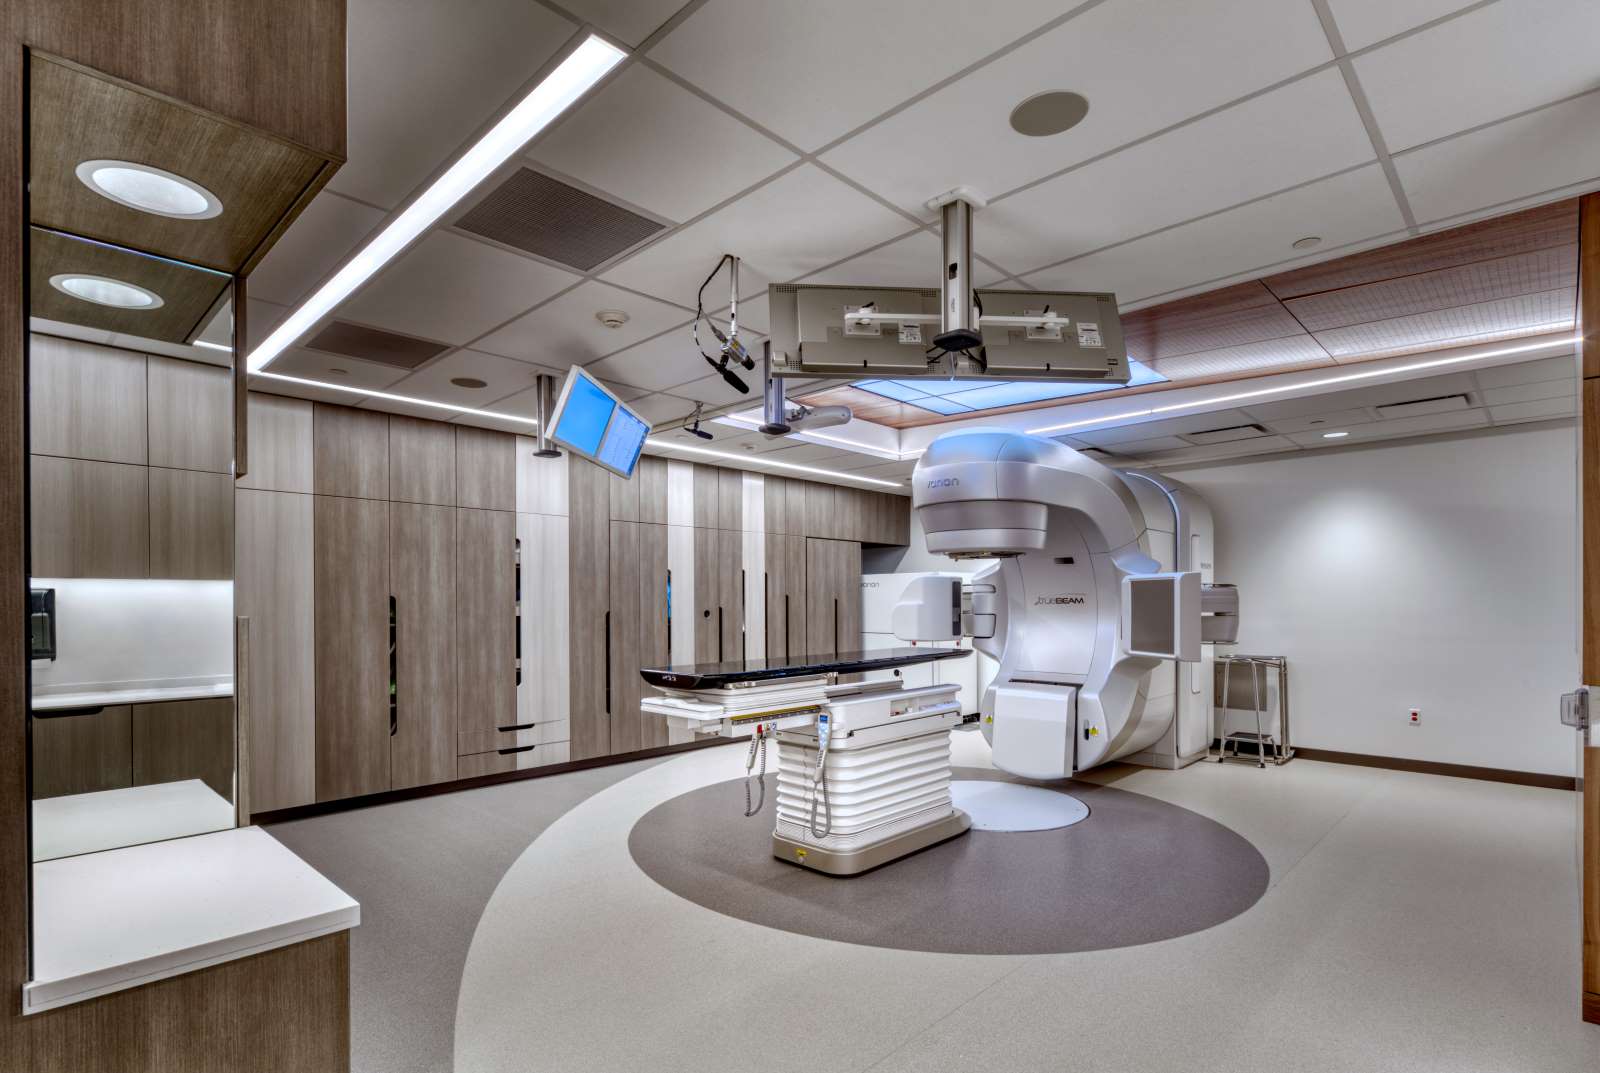 Linear Accelerator at McKay-Dee Hospital. Designed by TSA Architects, cancer center specialists.